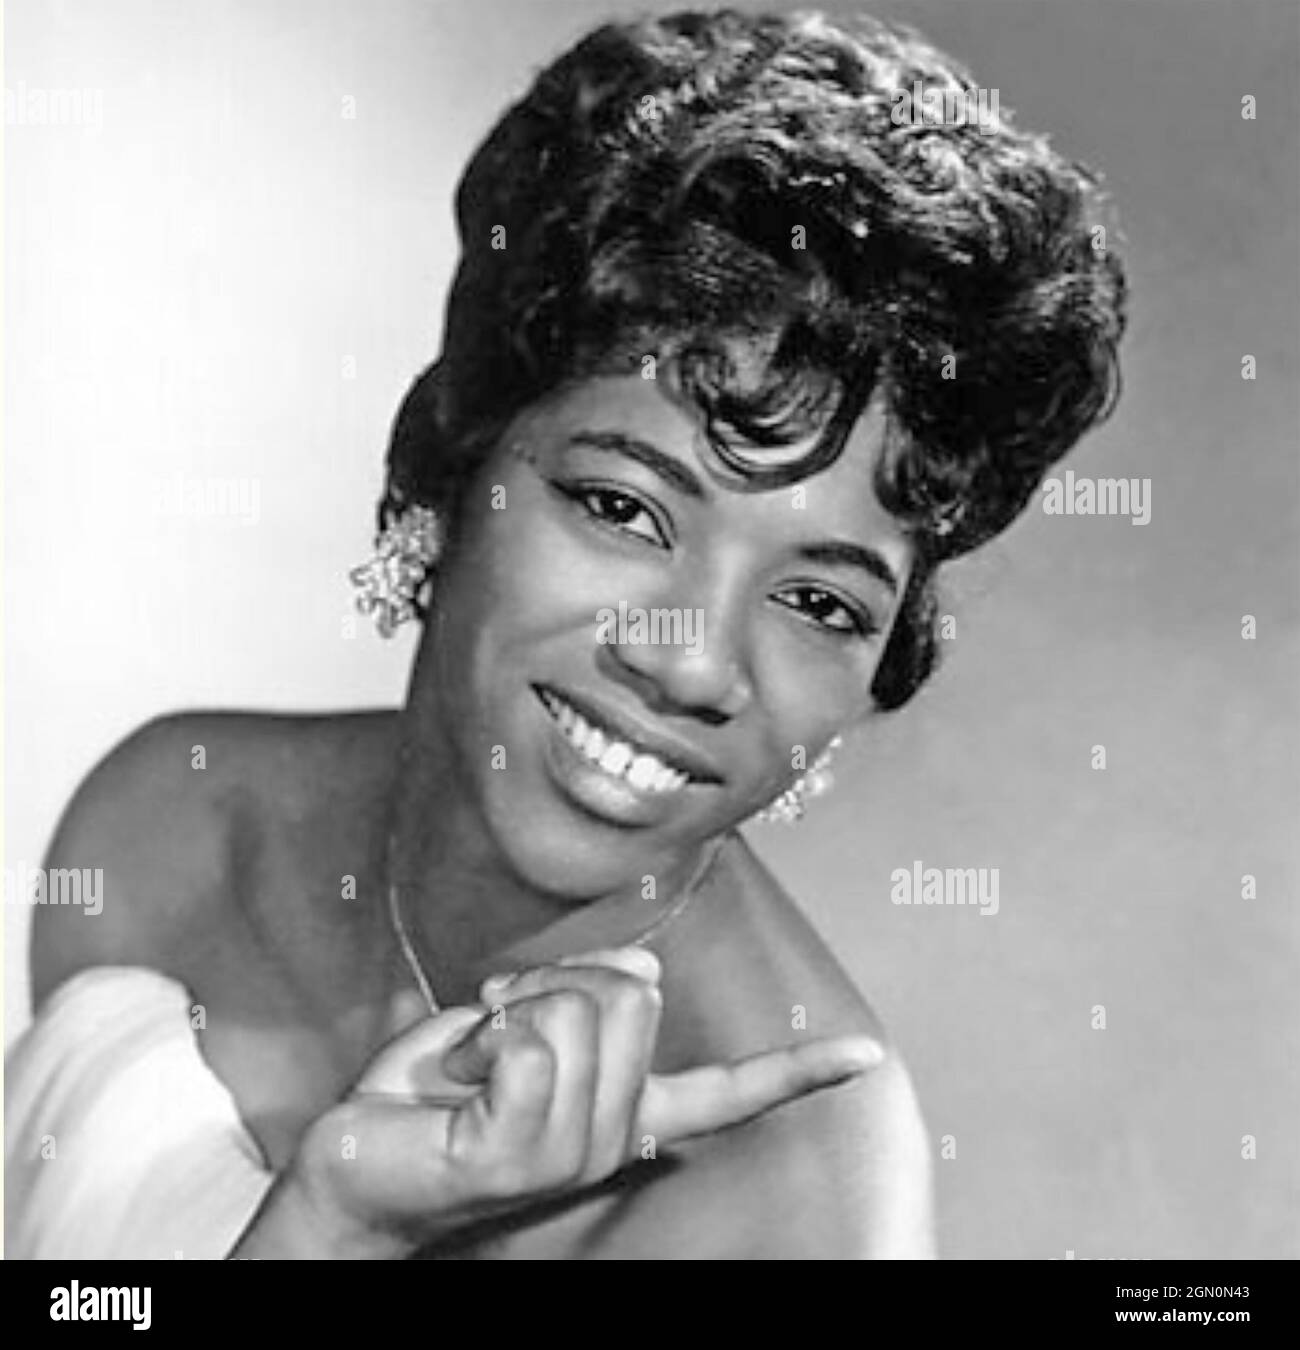 BARBARA LYNN Promotional photo of American R&B guitarist about  1965 Stock Photo